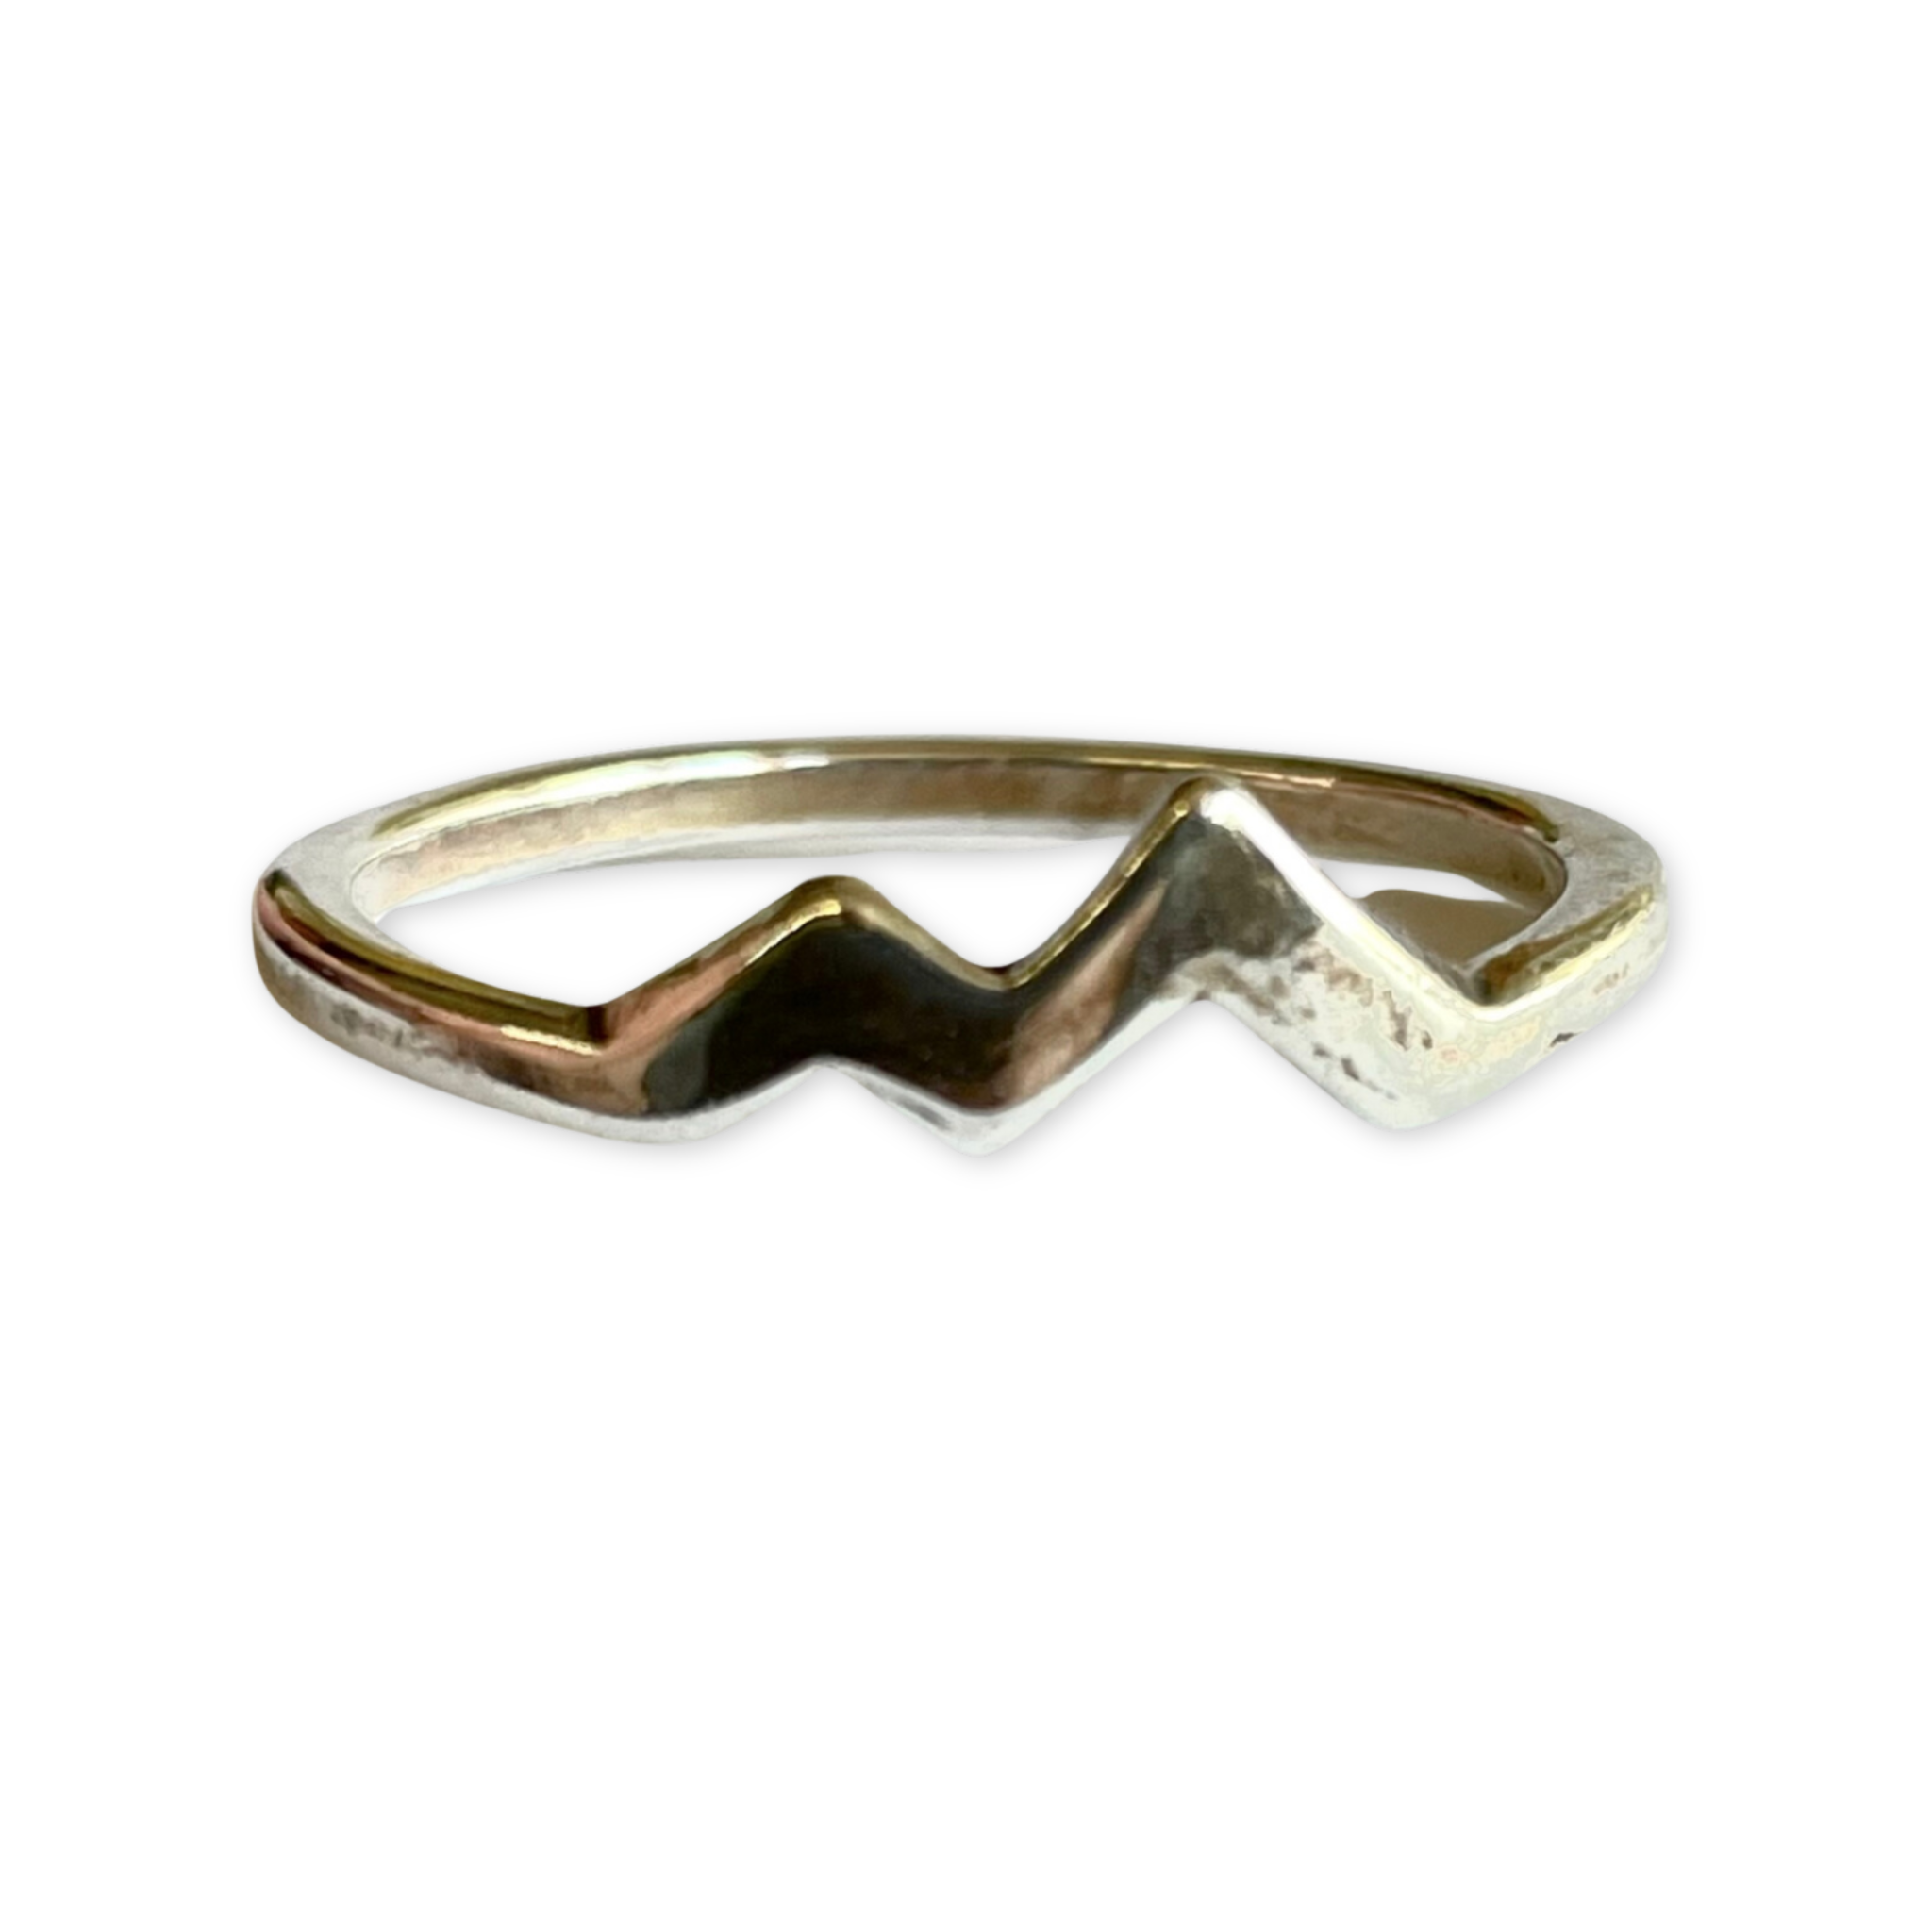 silver ring with mountain peaks